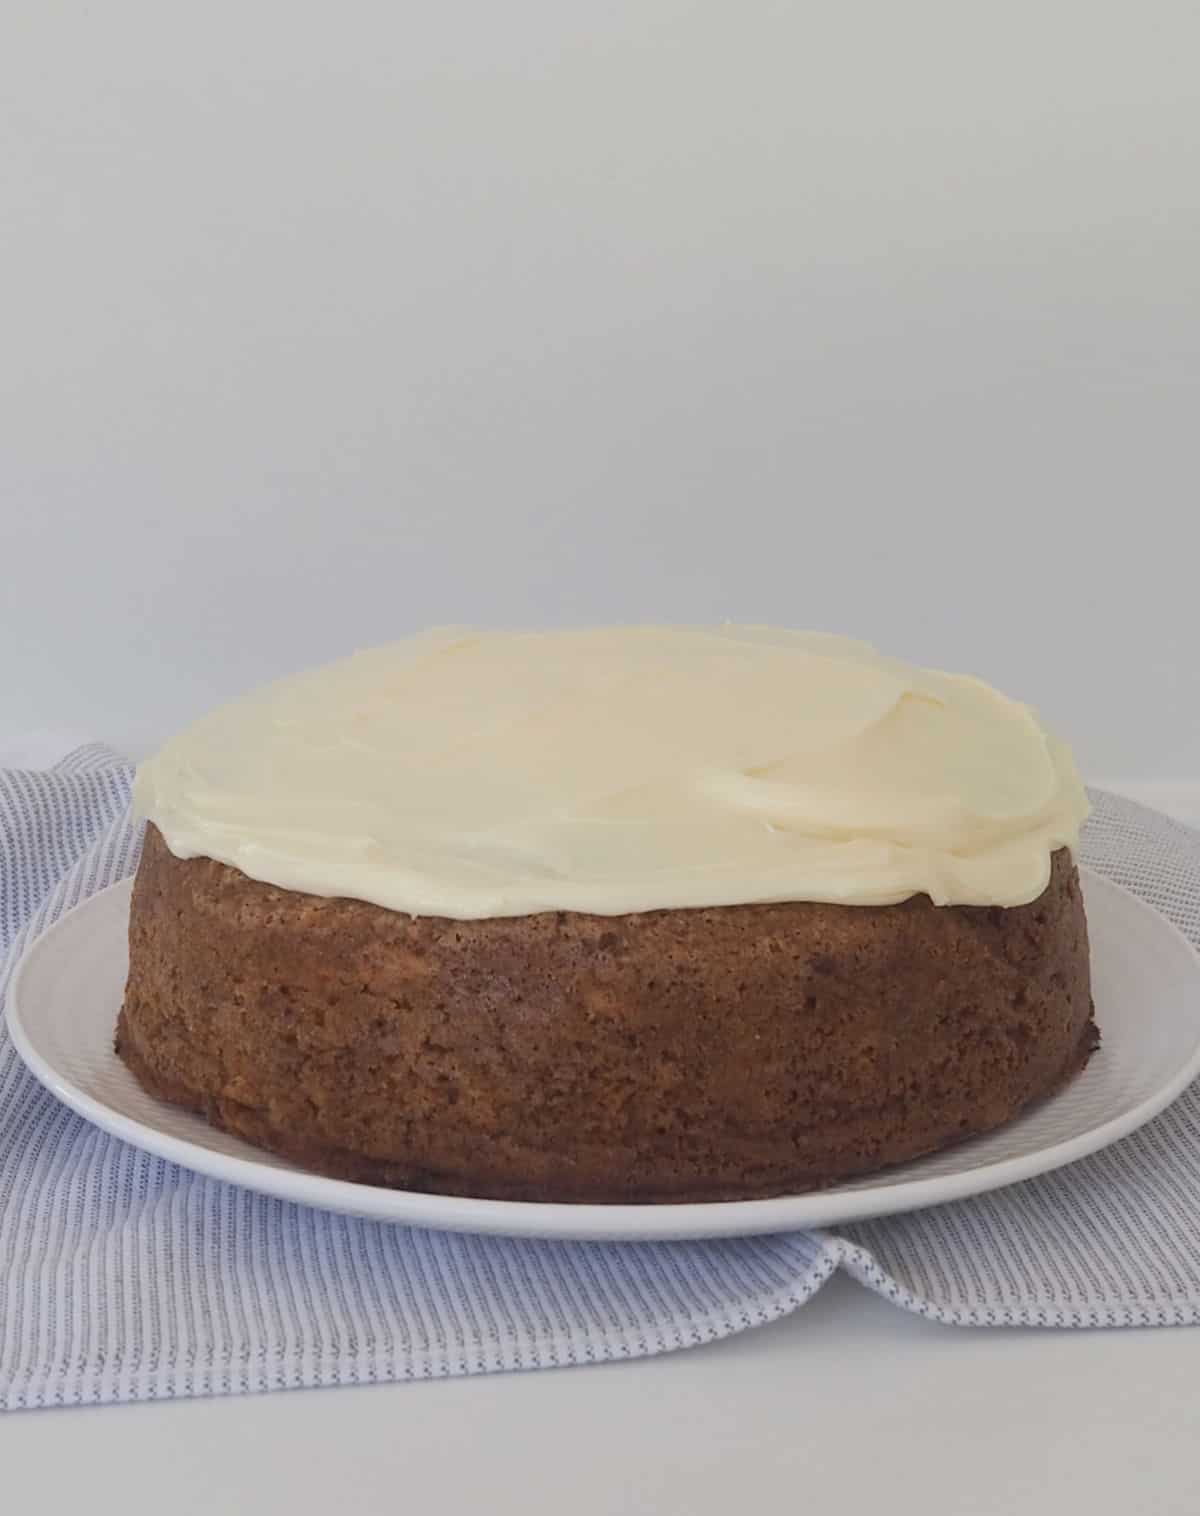 Carrot Cake topped with cream cheese frosting sitting on a white plate.